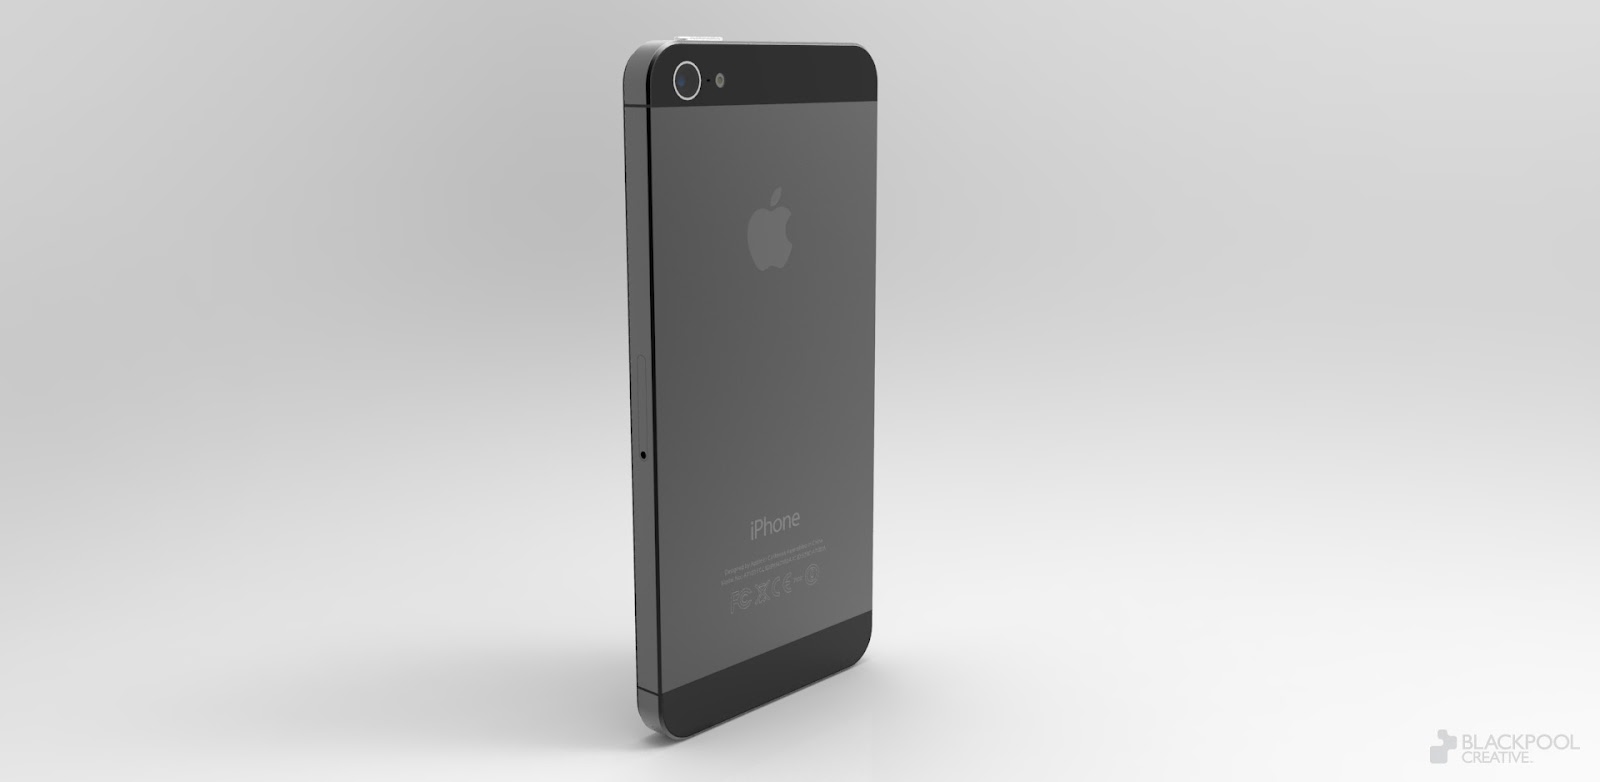 ... from the photos the new design looks better than the iPhone 4 and 4s